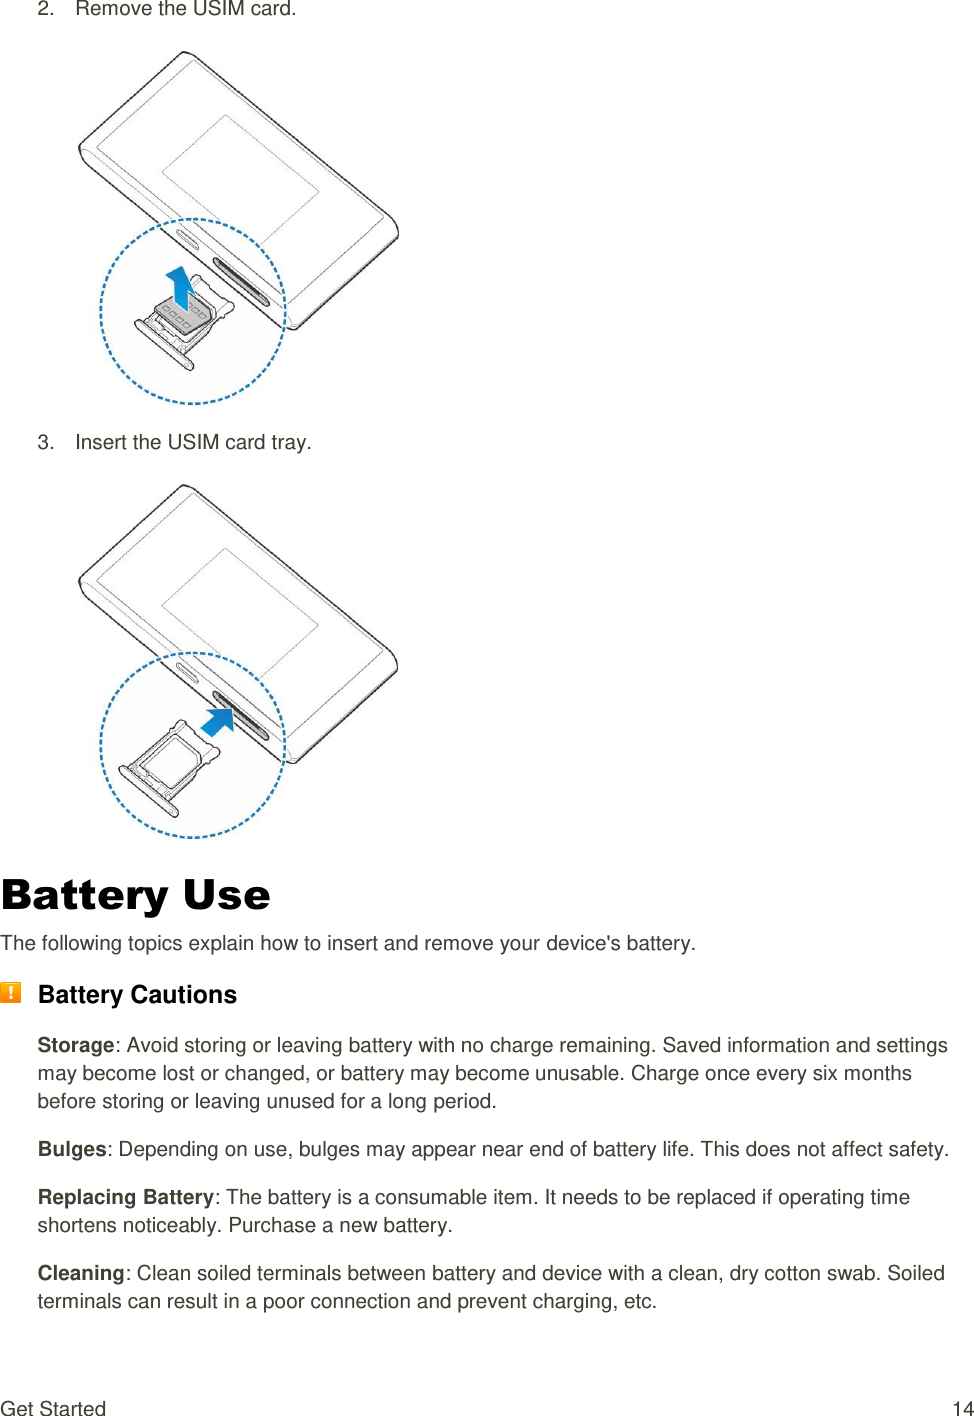 Get Started  14 2.  Remove the USIM card.    3.  Insert the USIM card tray.    Battery Use The following topics explain how to insert and remove your device&apos;s battery.  Battery Cautions Storage: Avoid storing or leaving battery with no charge remaining. Saved information and settings may become lost or changed, or battery may become unusable. Charge once every six months before storing or leaving unused for a long period. Bulges: Depending on use, bulges may appear near end of battery life. This does not affect safety. Replacing Battery: The battery is a consumable item. It needs to be replaced if operating time shortens noticeably. Purchase a new battery. Cleaning: Clean soiled terminals between battery and device with a clean, dry cotton swab. Soiled terminals can result in a poor connection and prevent charging, etc. 